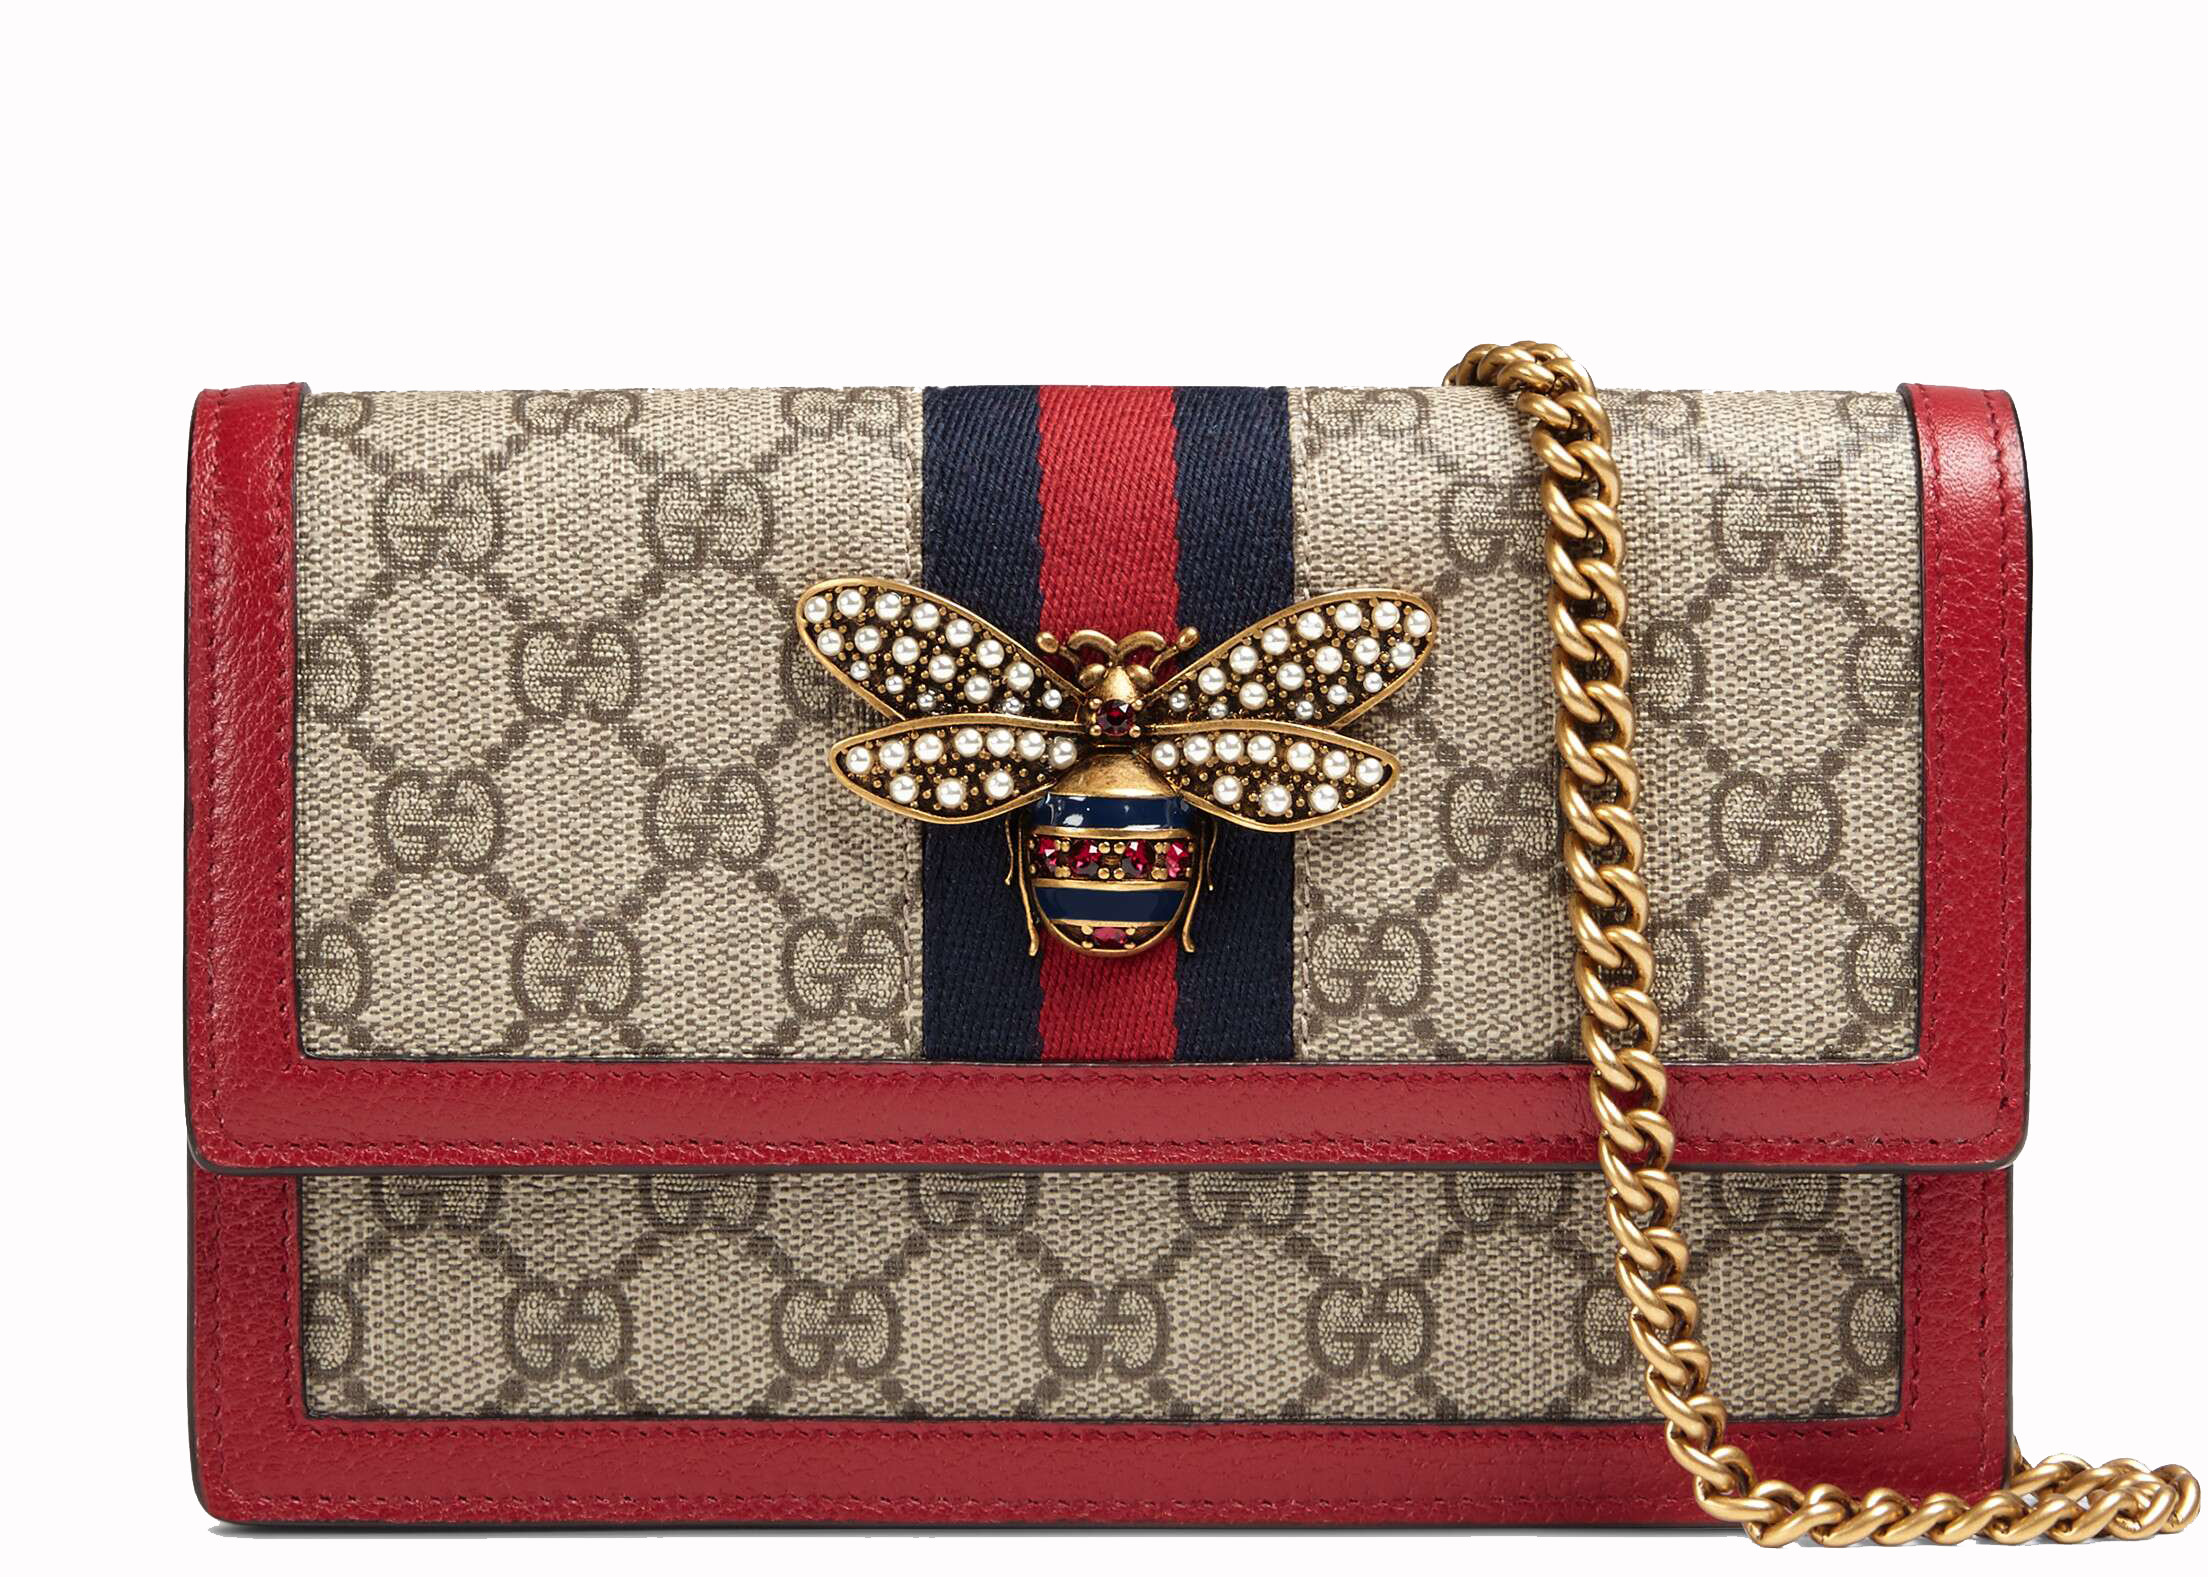 Pre-owned Gucci Queen Margaret Mini Bag Gg Supreme Beige/red